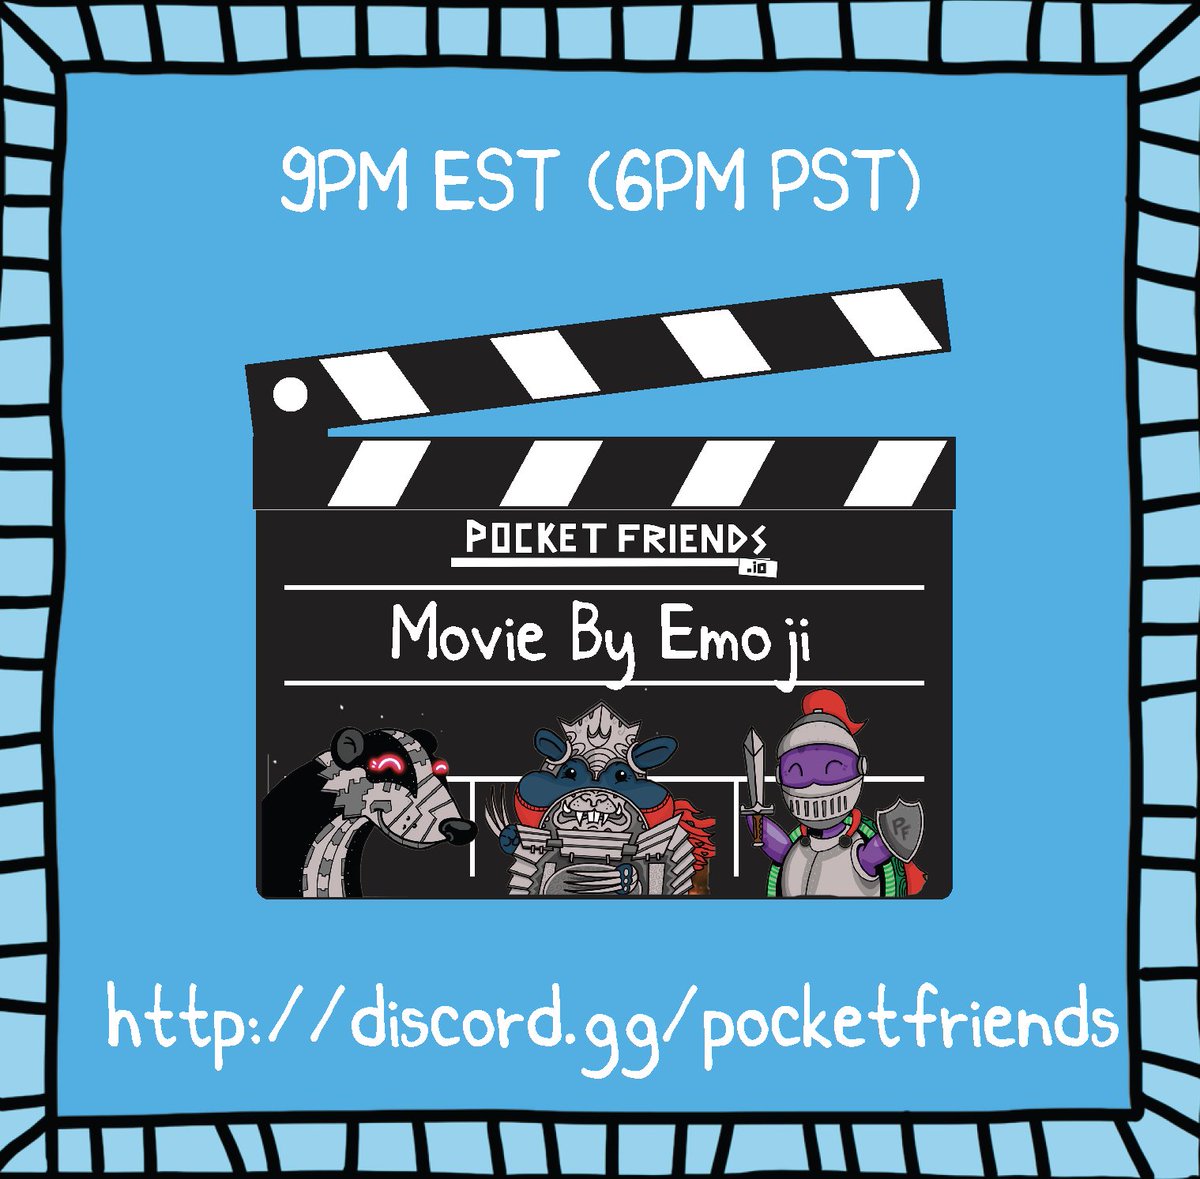 🎬 GM and HAPPY FRIDAY! 🎬 Join us in our discord tonight for fun times with movie by emoji! Have an amazing day. ❤️🌳